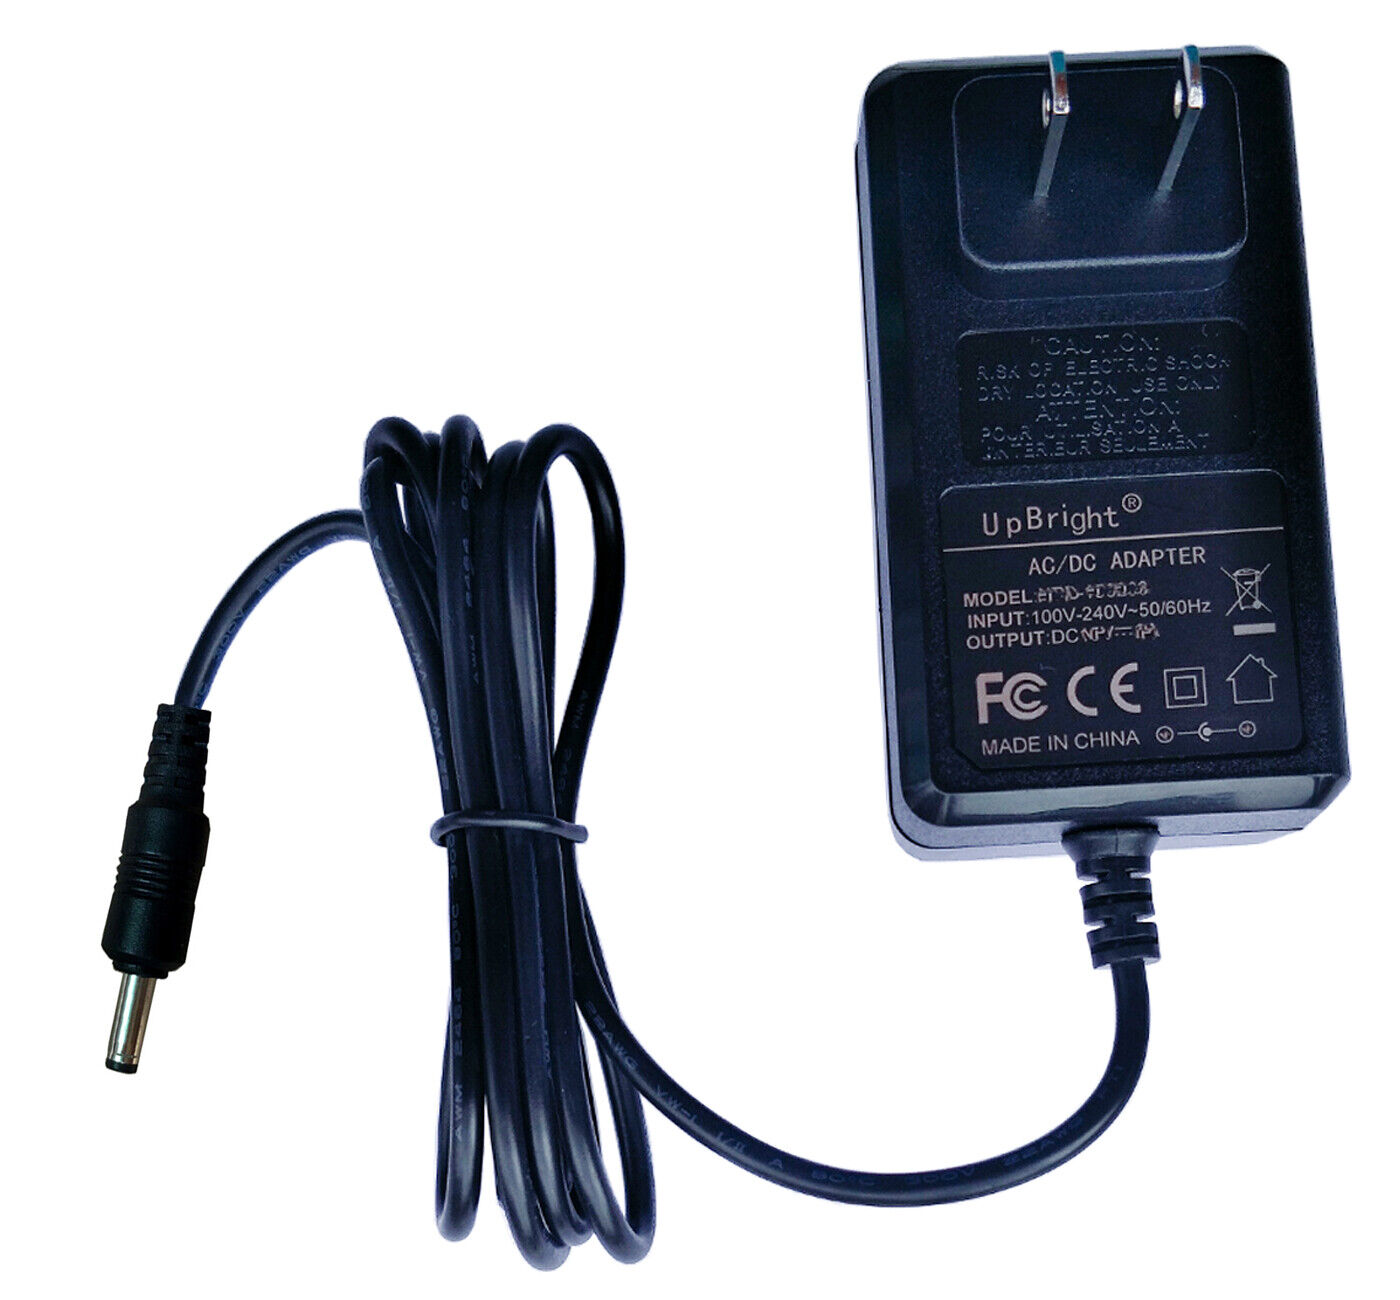 19V AC Adapter For Asus L210 L210M L210MA-DB01 Laptop Power Supply Cord Charger